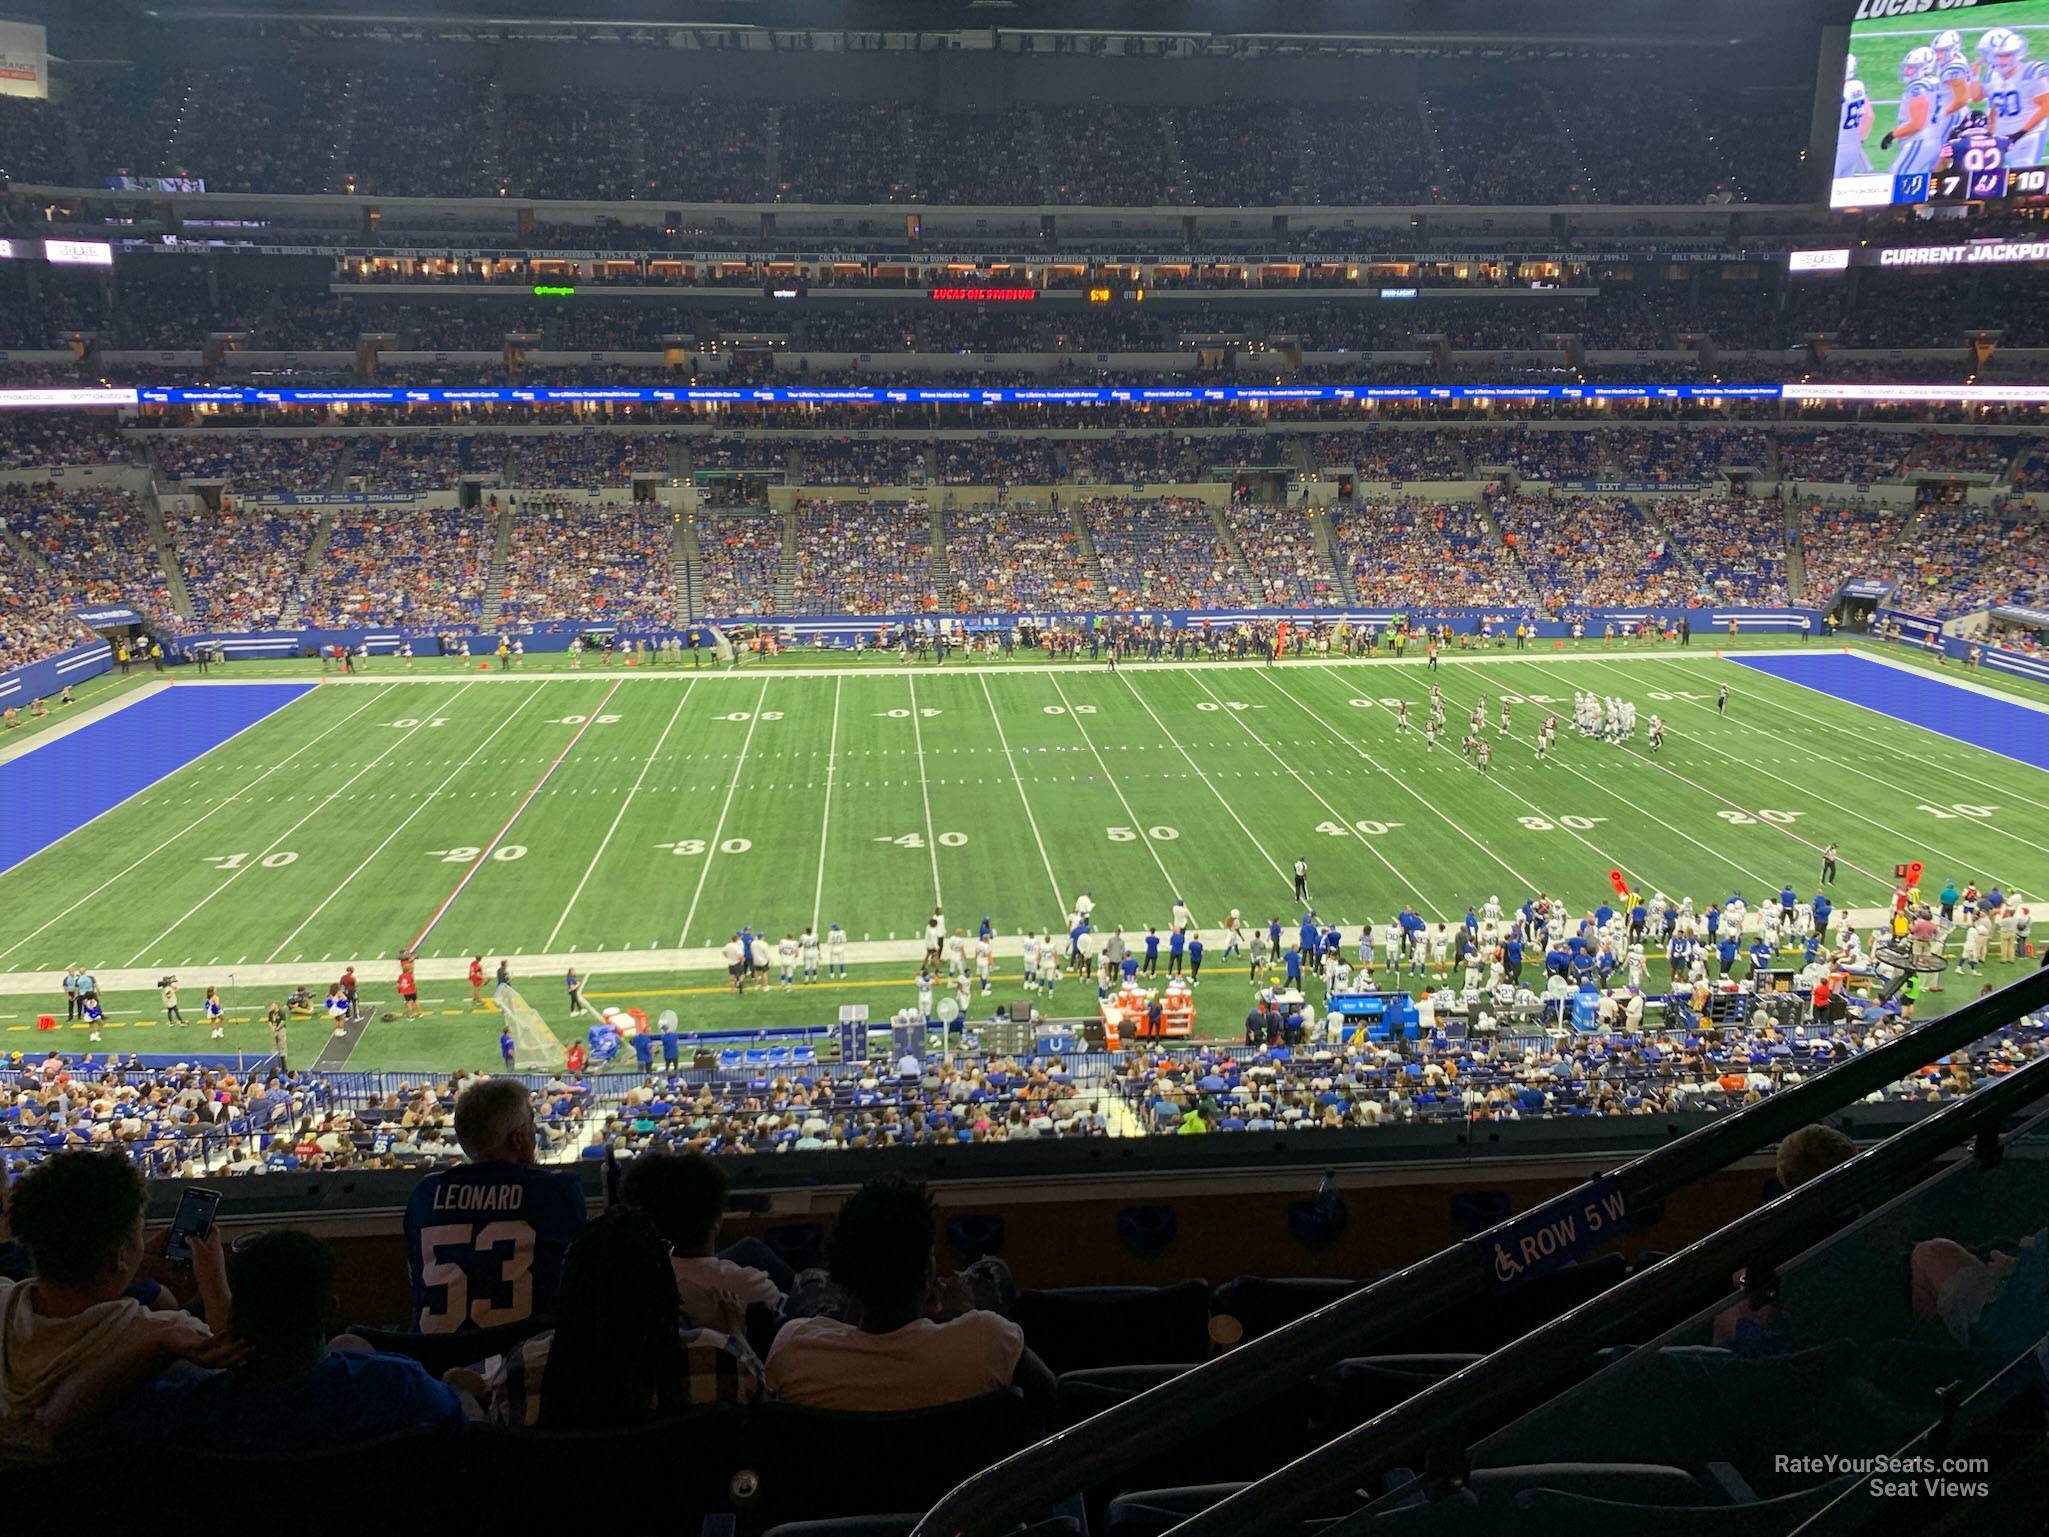 section 341, row 4n seat view  for football - lucas oil stadium